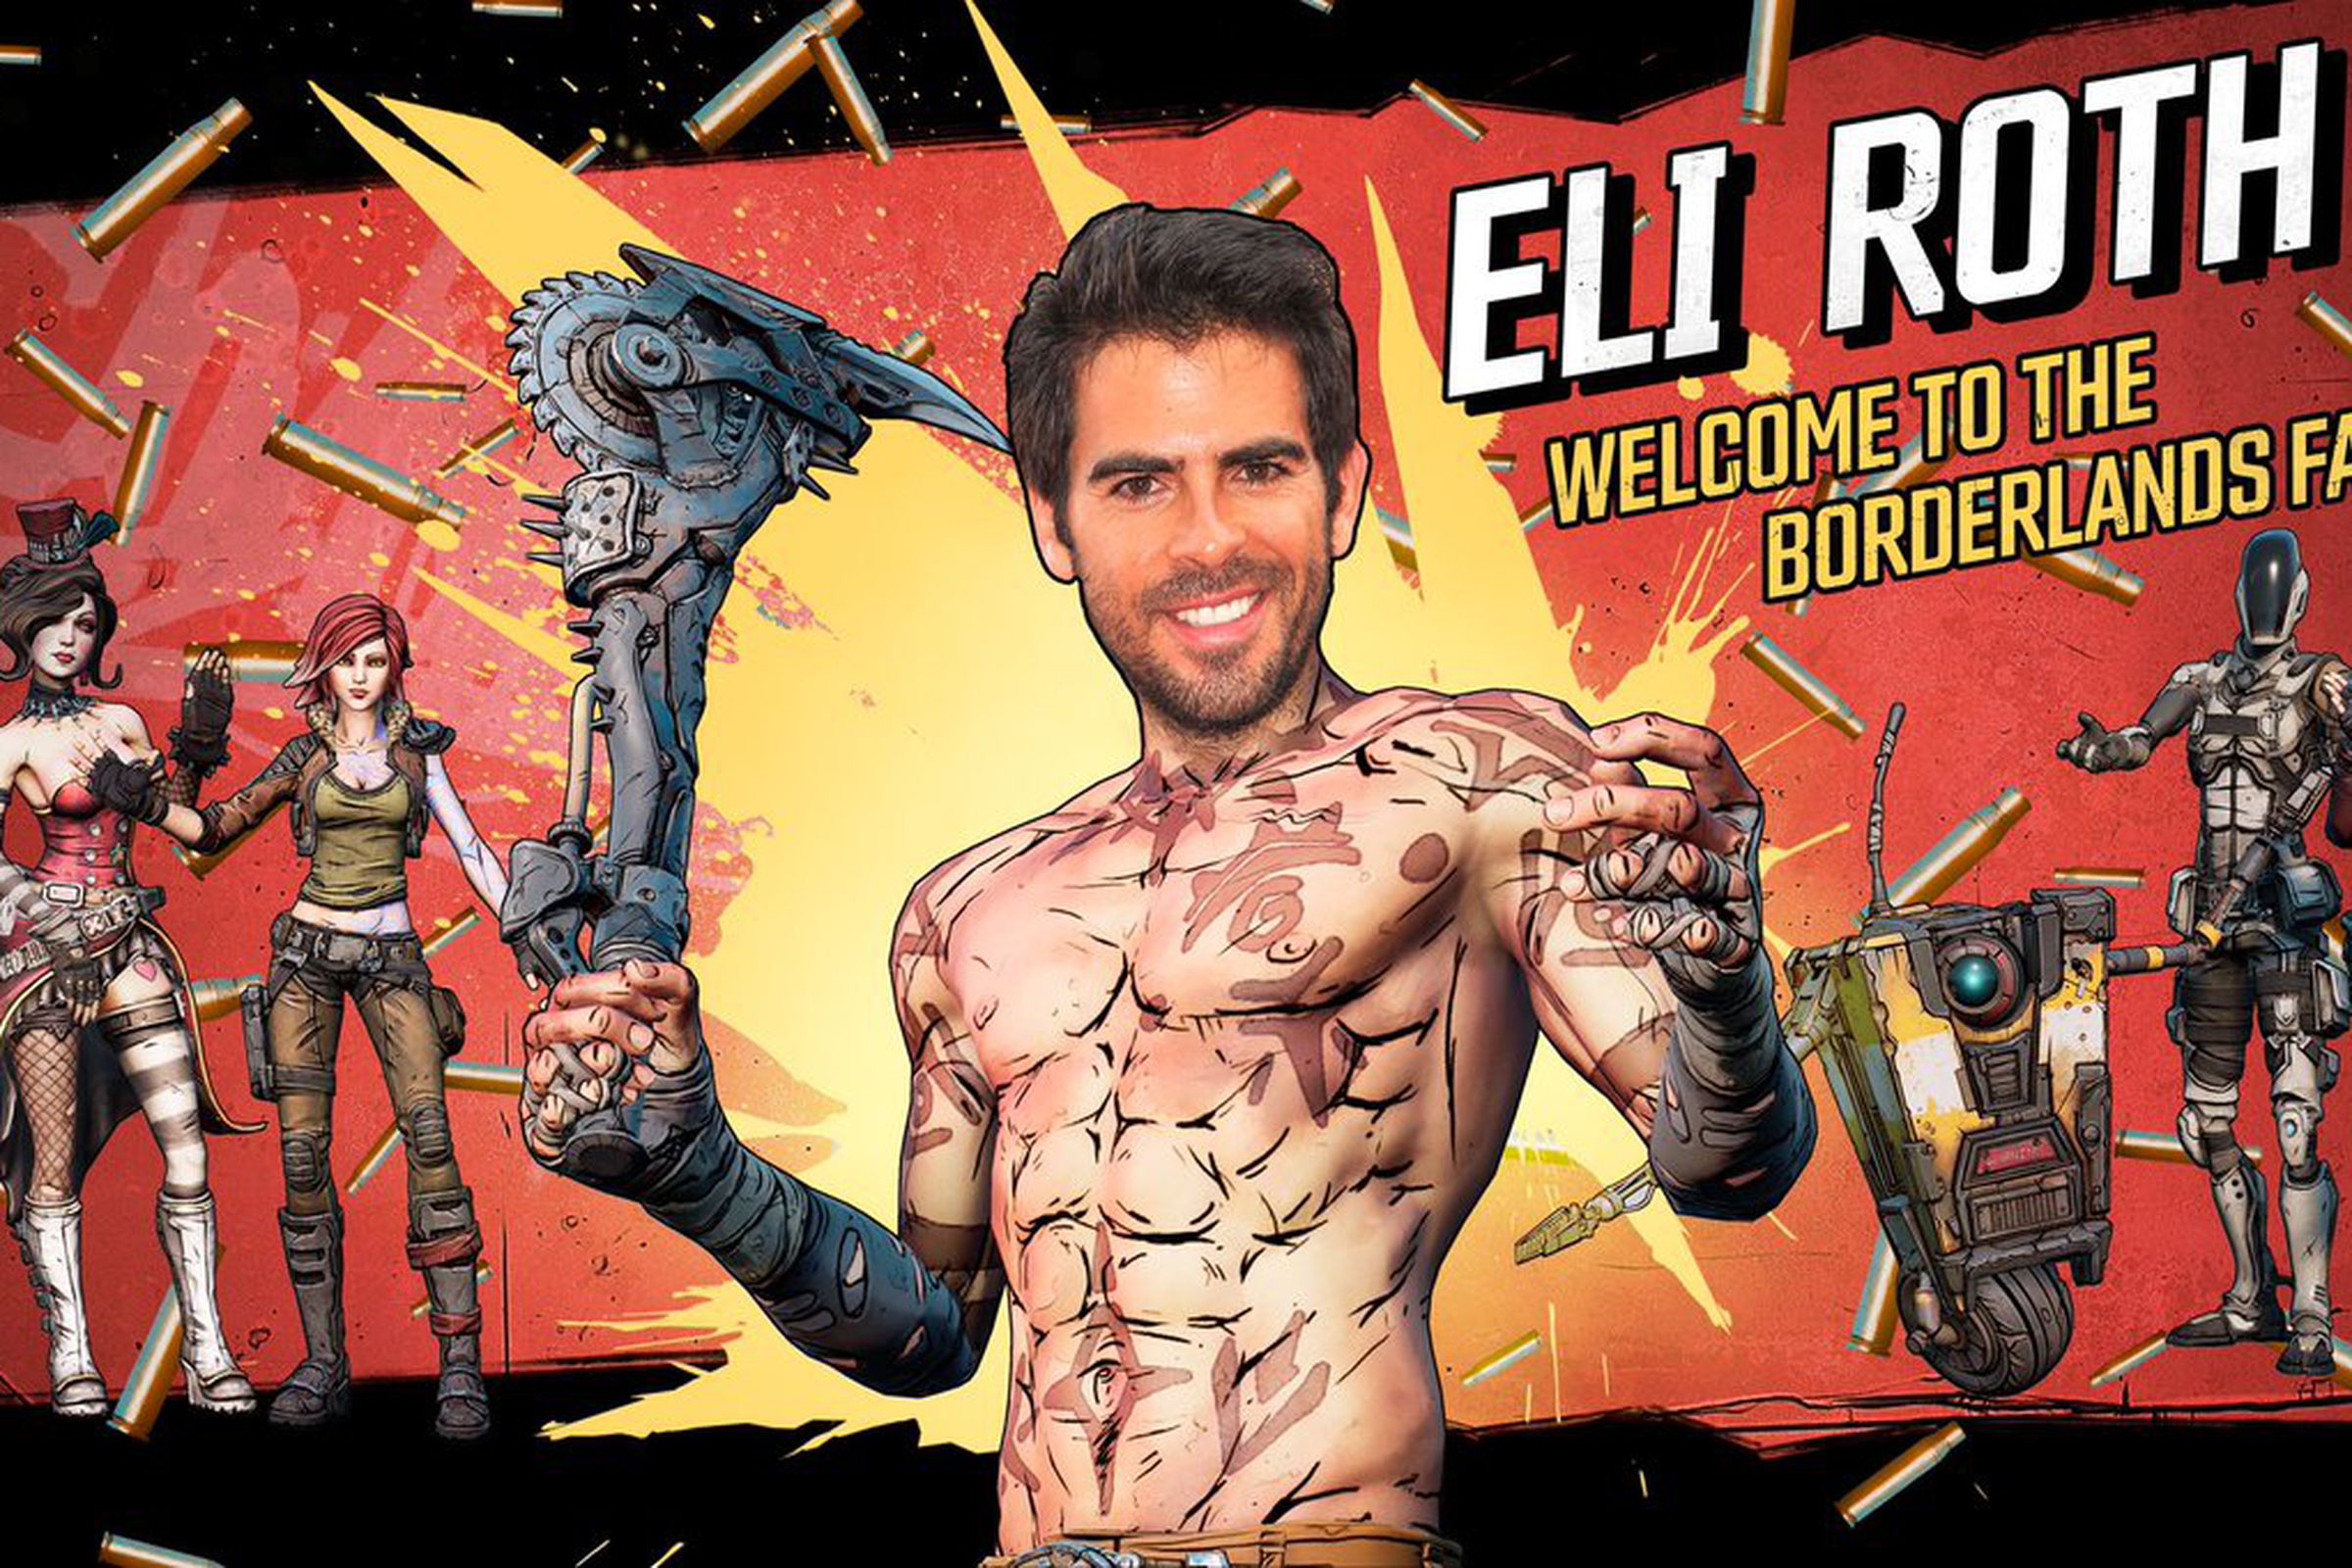 Eli Roth’s announcement post for the Borderlands film adaptation